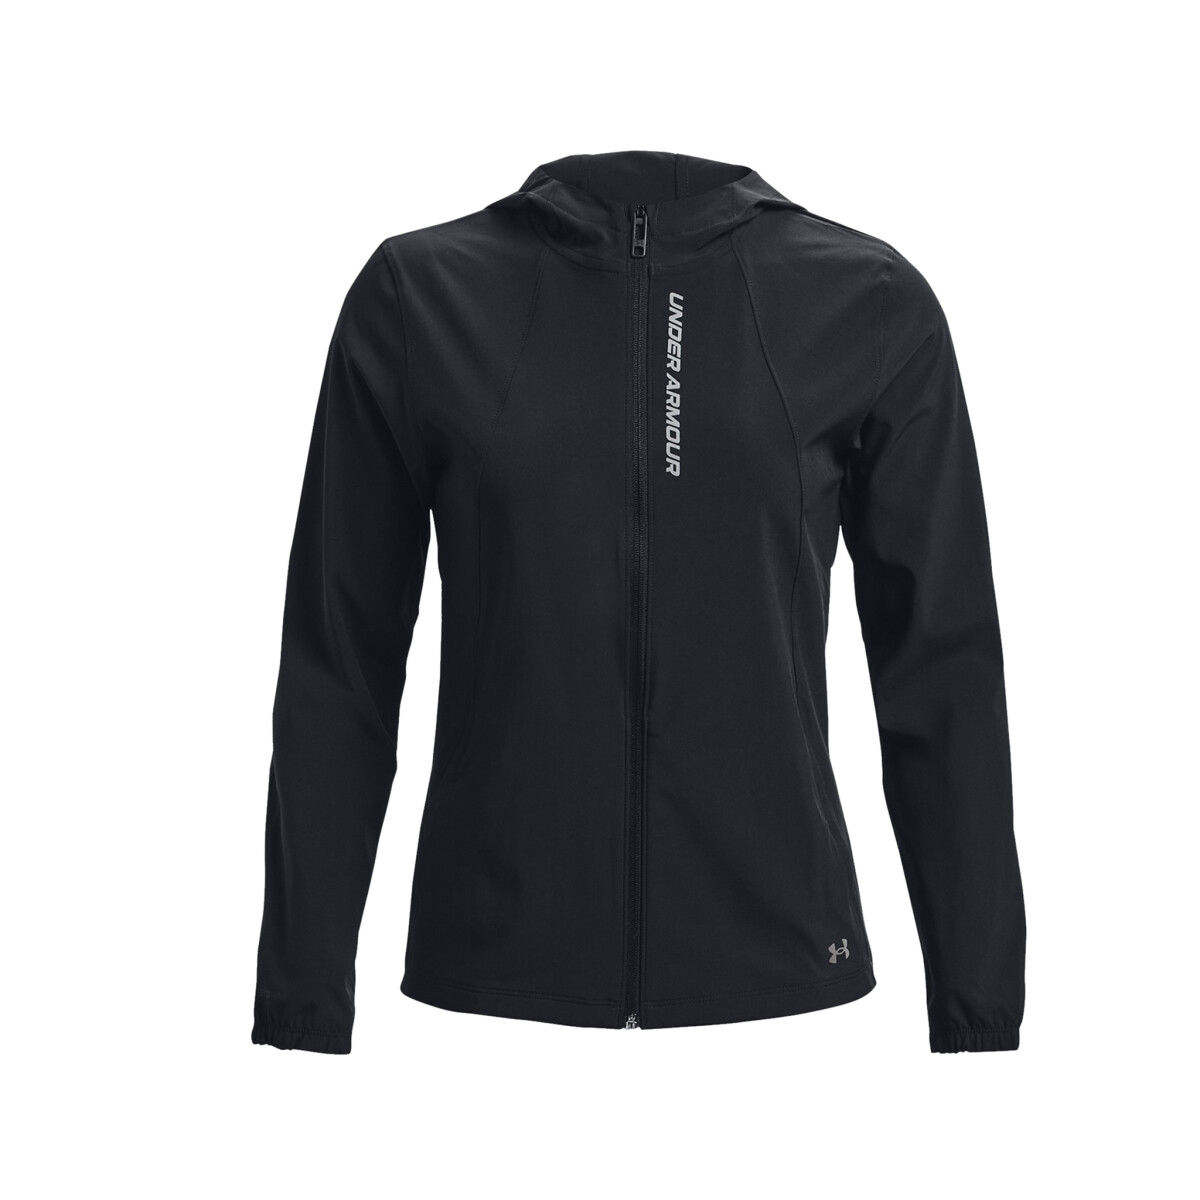 CAMPERA UNDER ARMOUR OUTRUN THE STORM - Black 